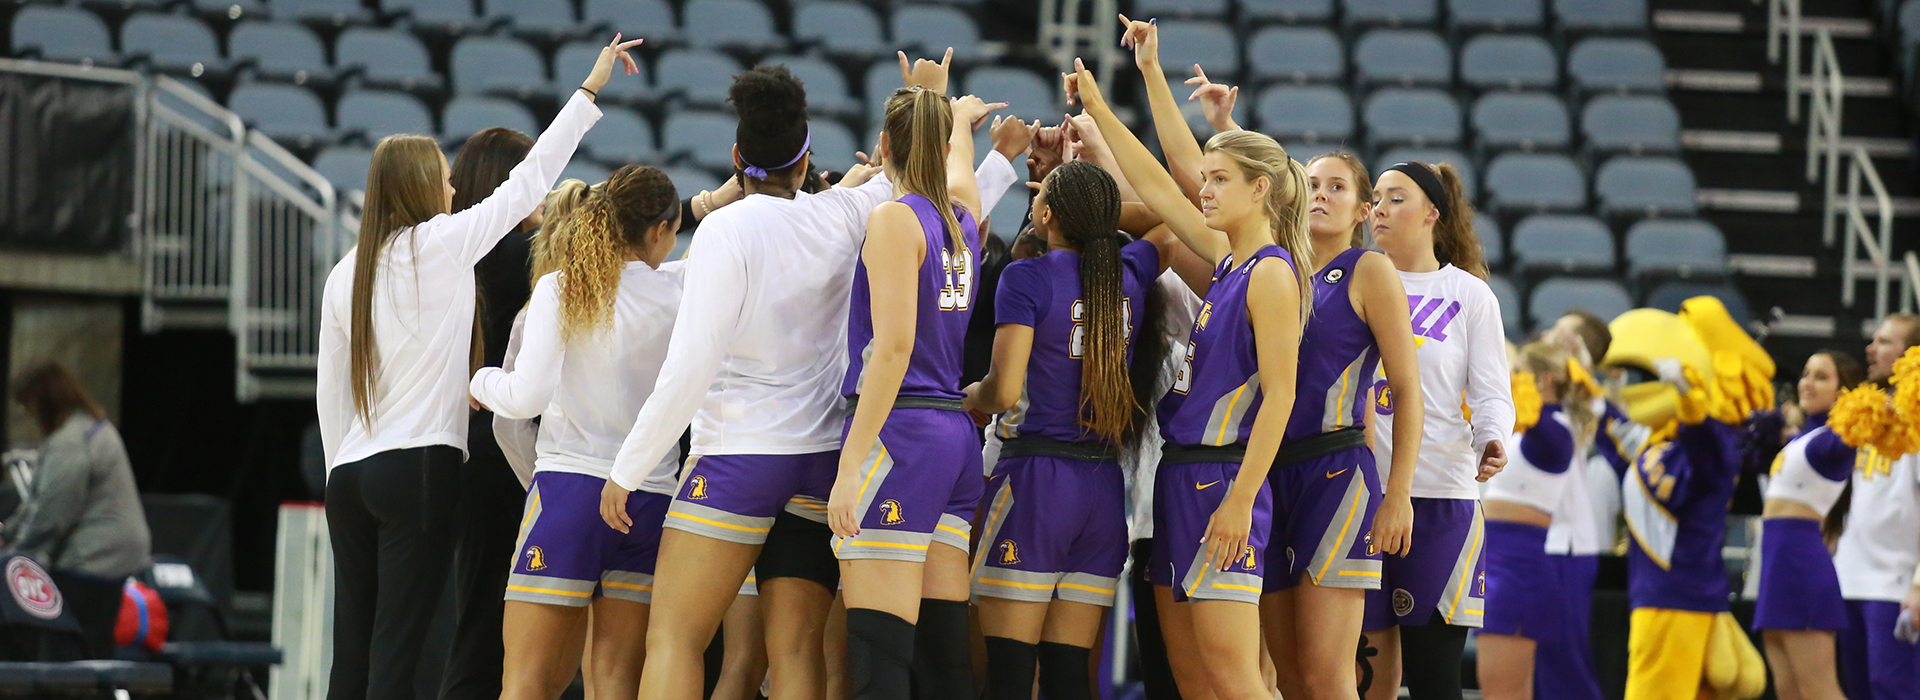 It ain't over yet -- Golden Eagles claim automatic berth to WNIT